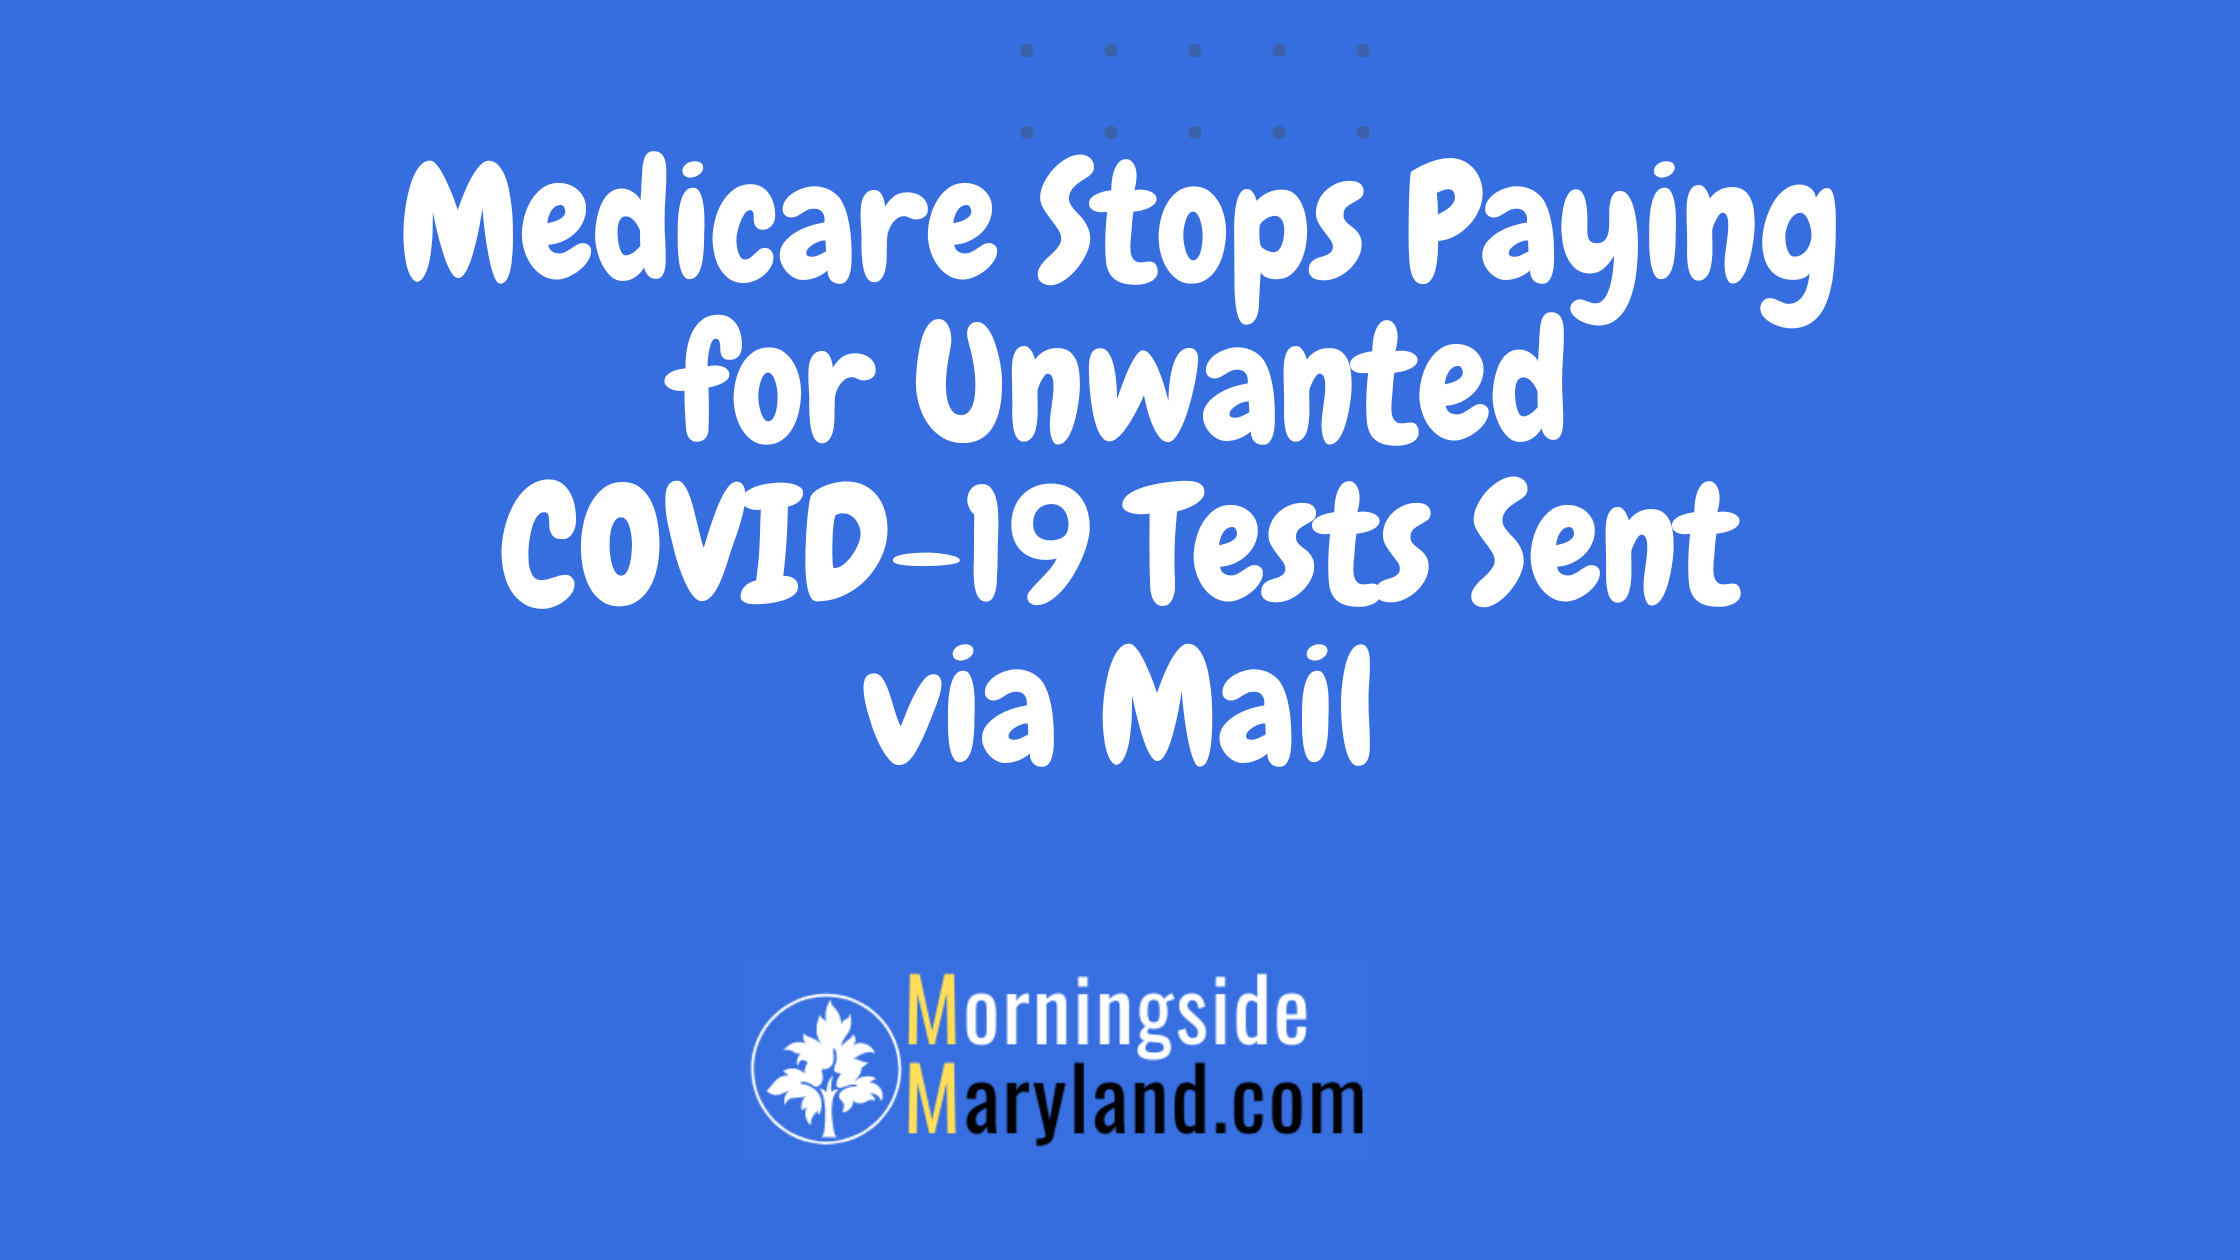 Medicare Stops Paying for Unwanted COVID-19 Tests Sent via Mail